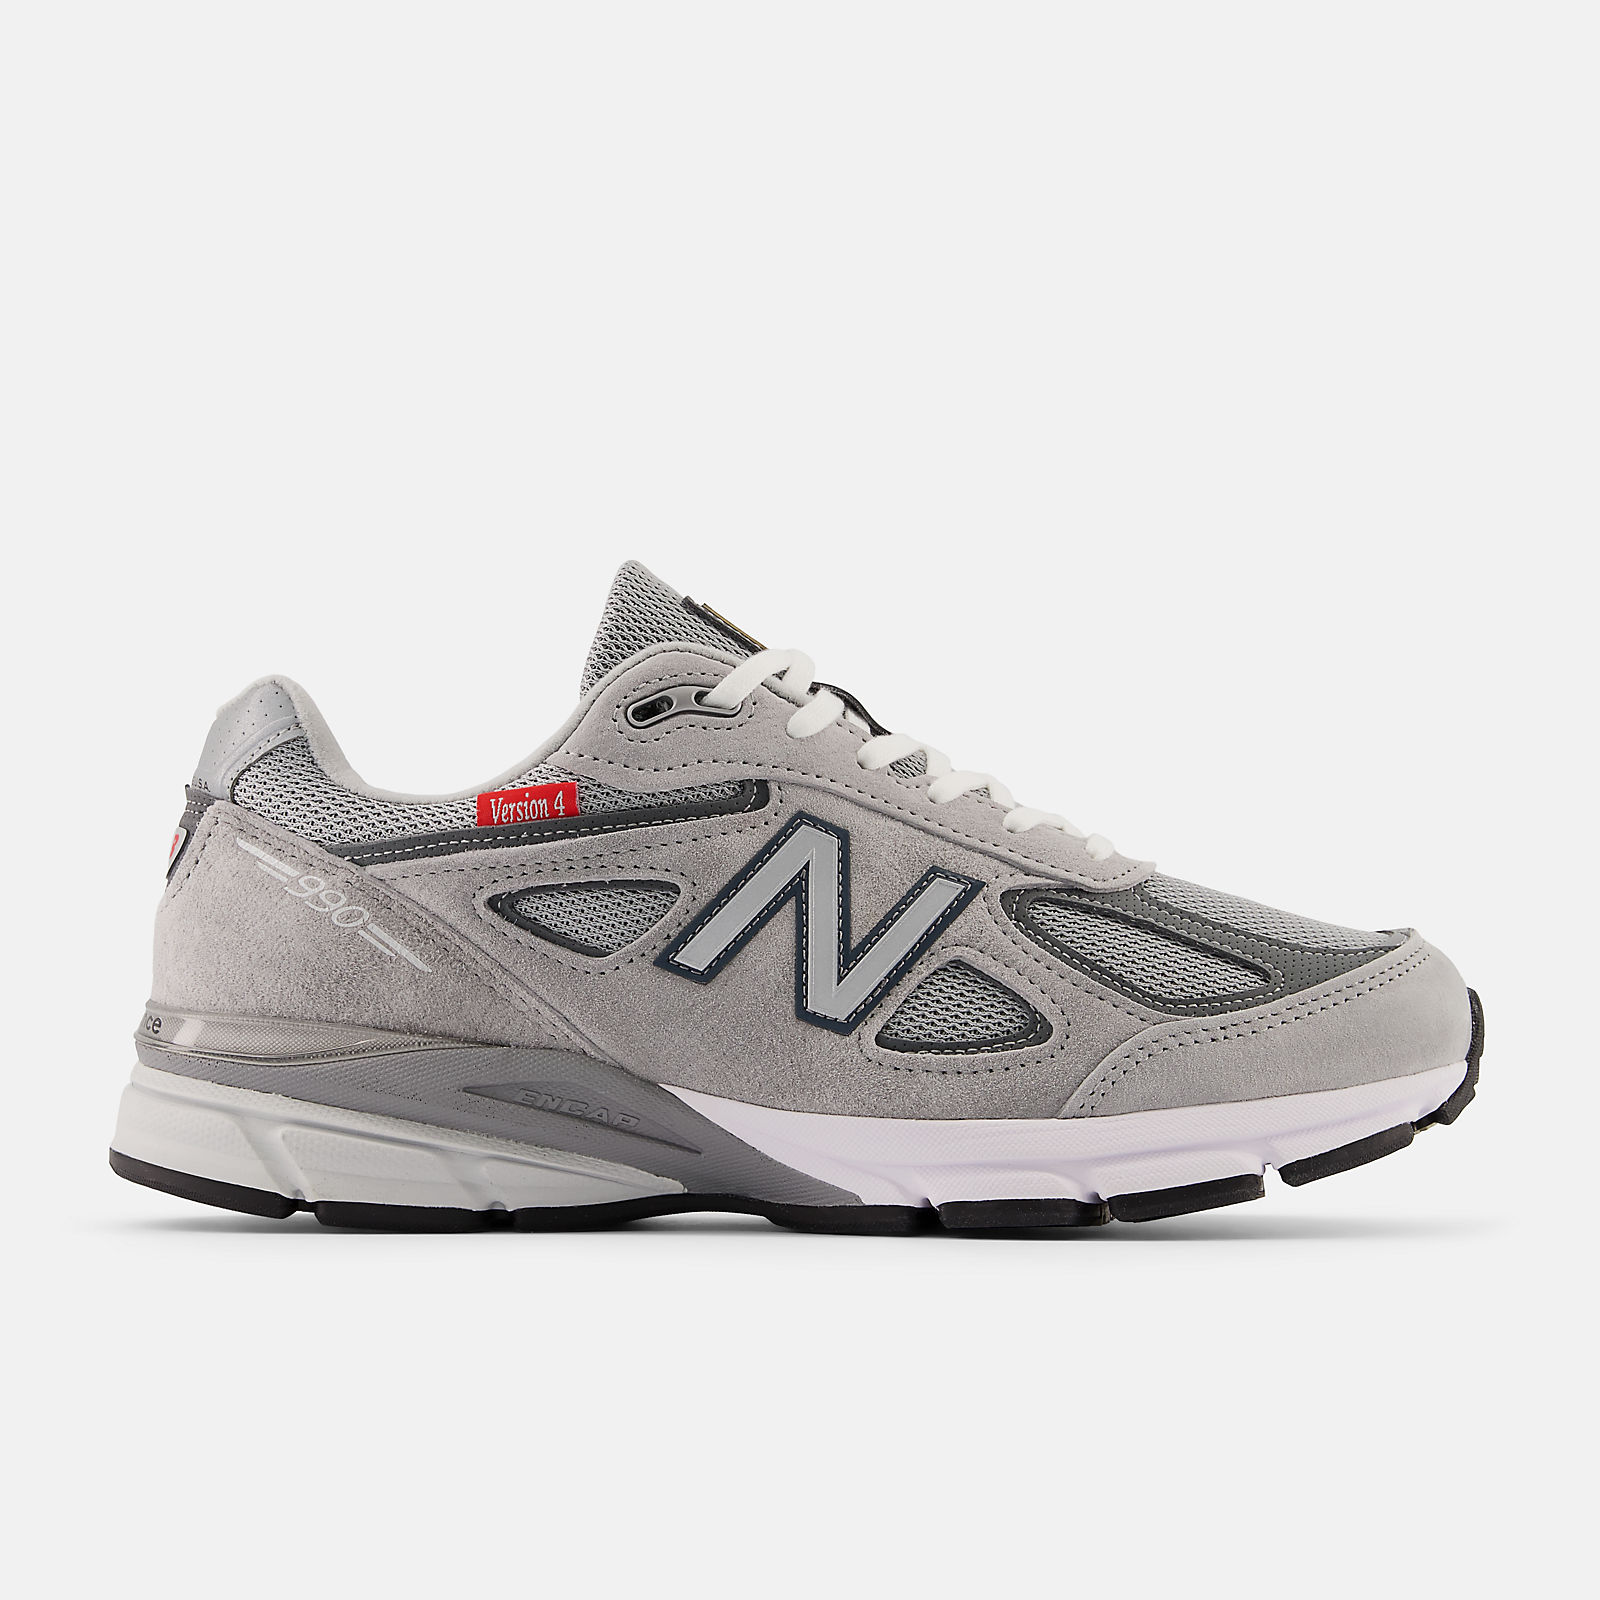 Made in US 990v4 - New Balance